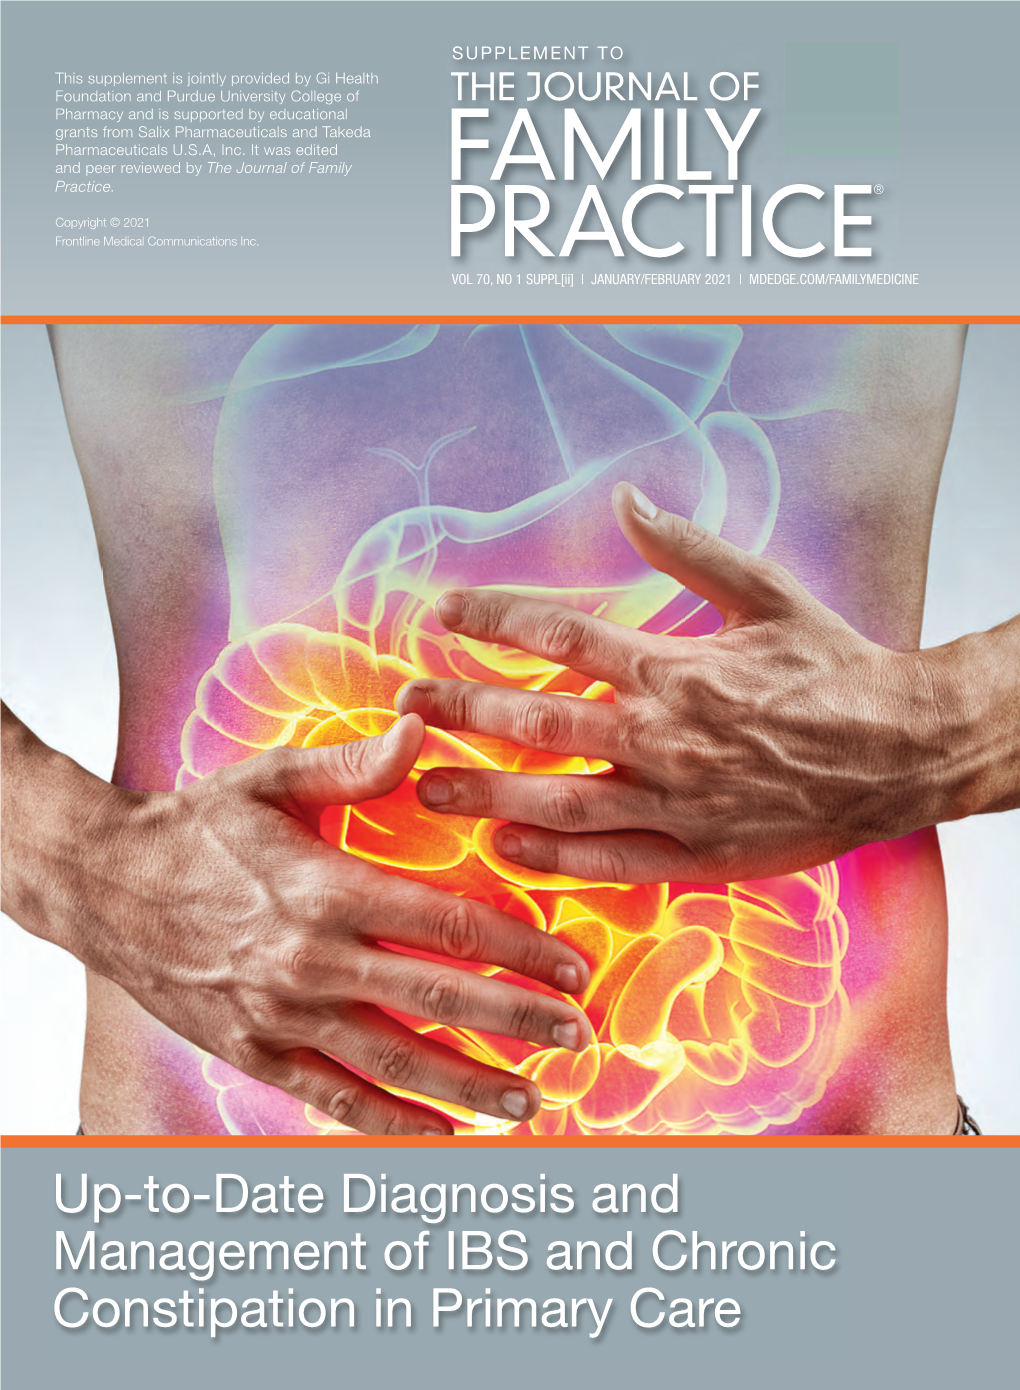 Up-To-Date Diagnosis and Management of IBS and Chronic Constipation in Primary Care